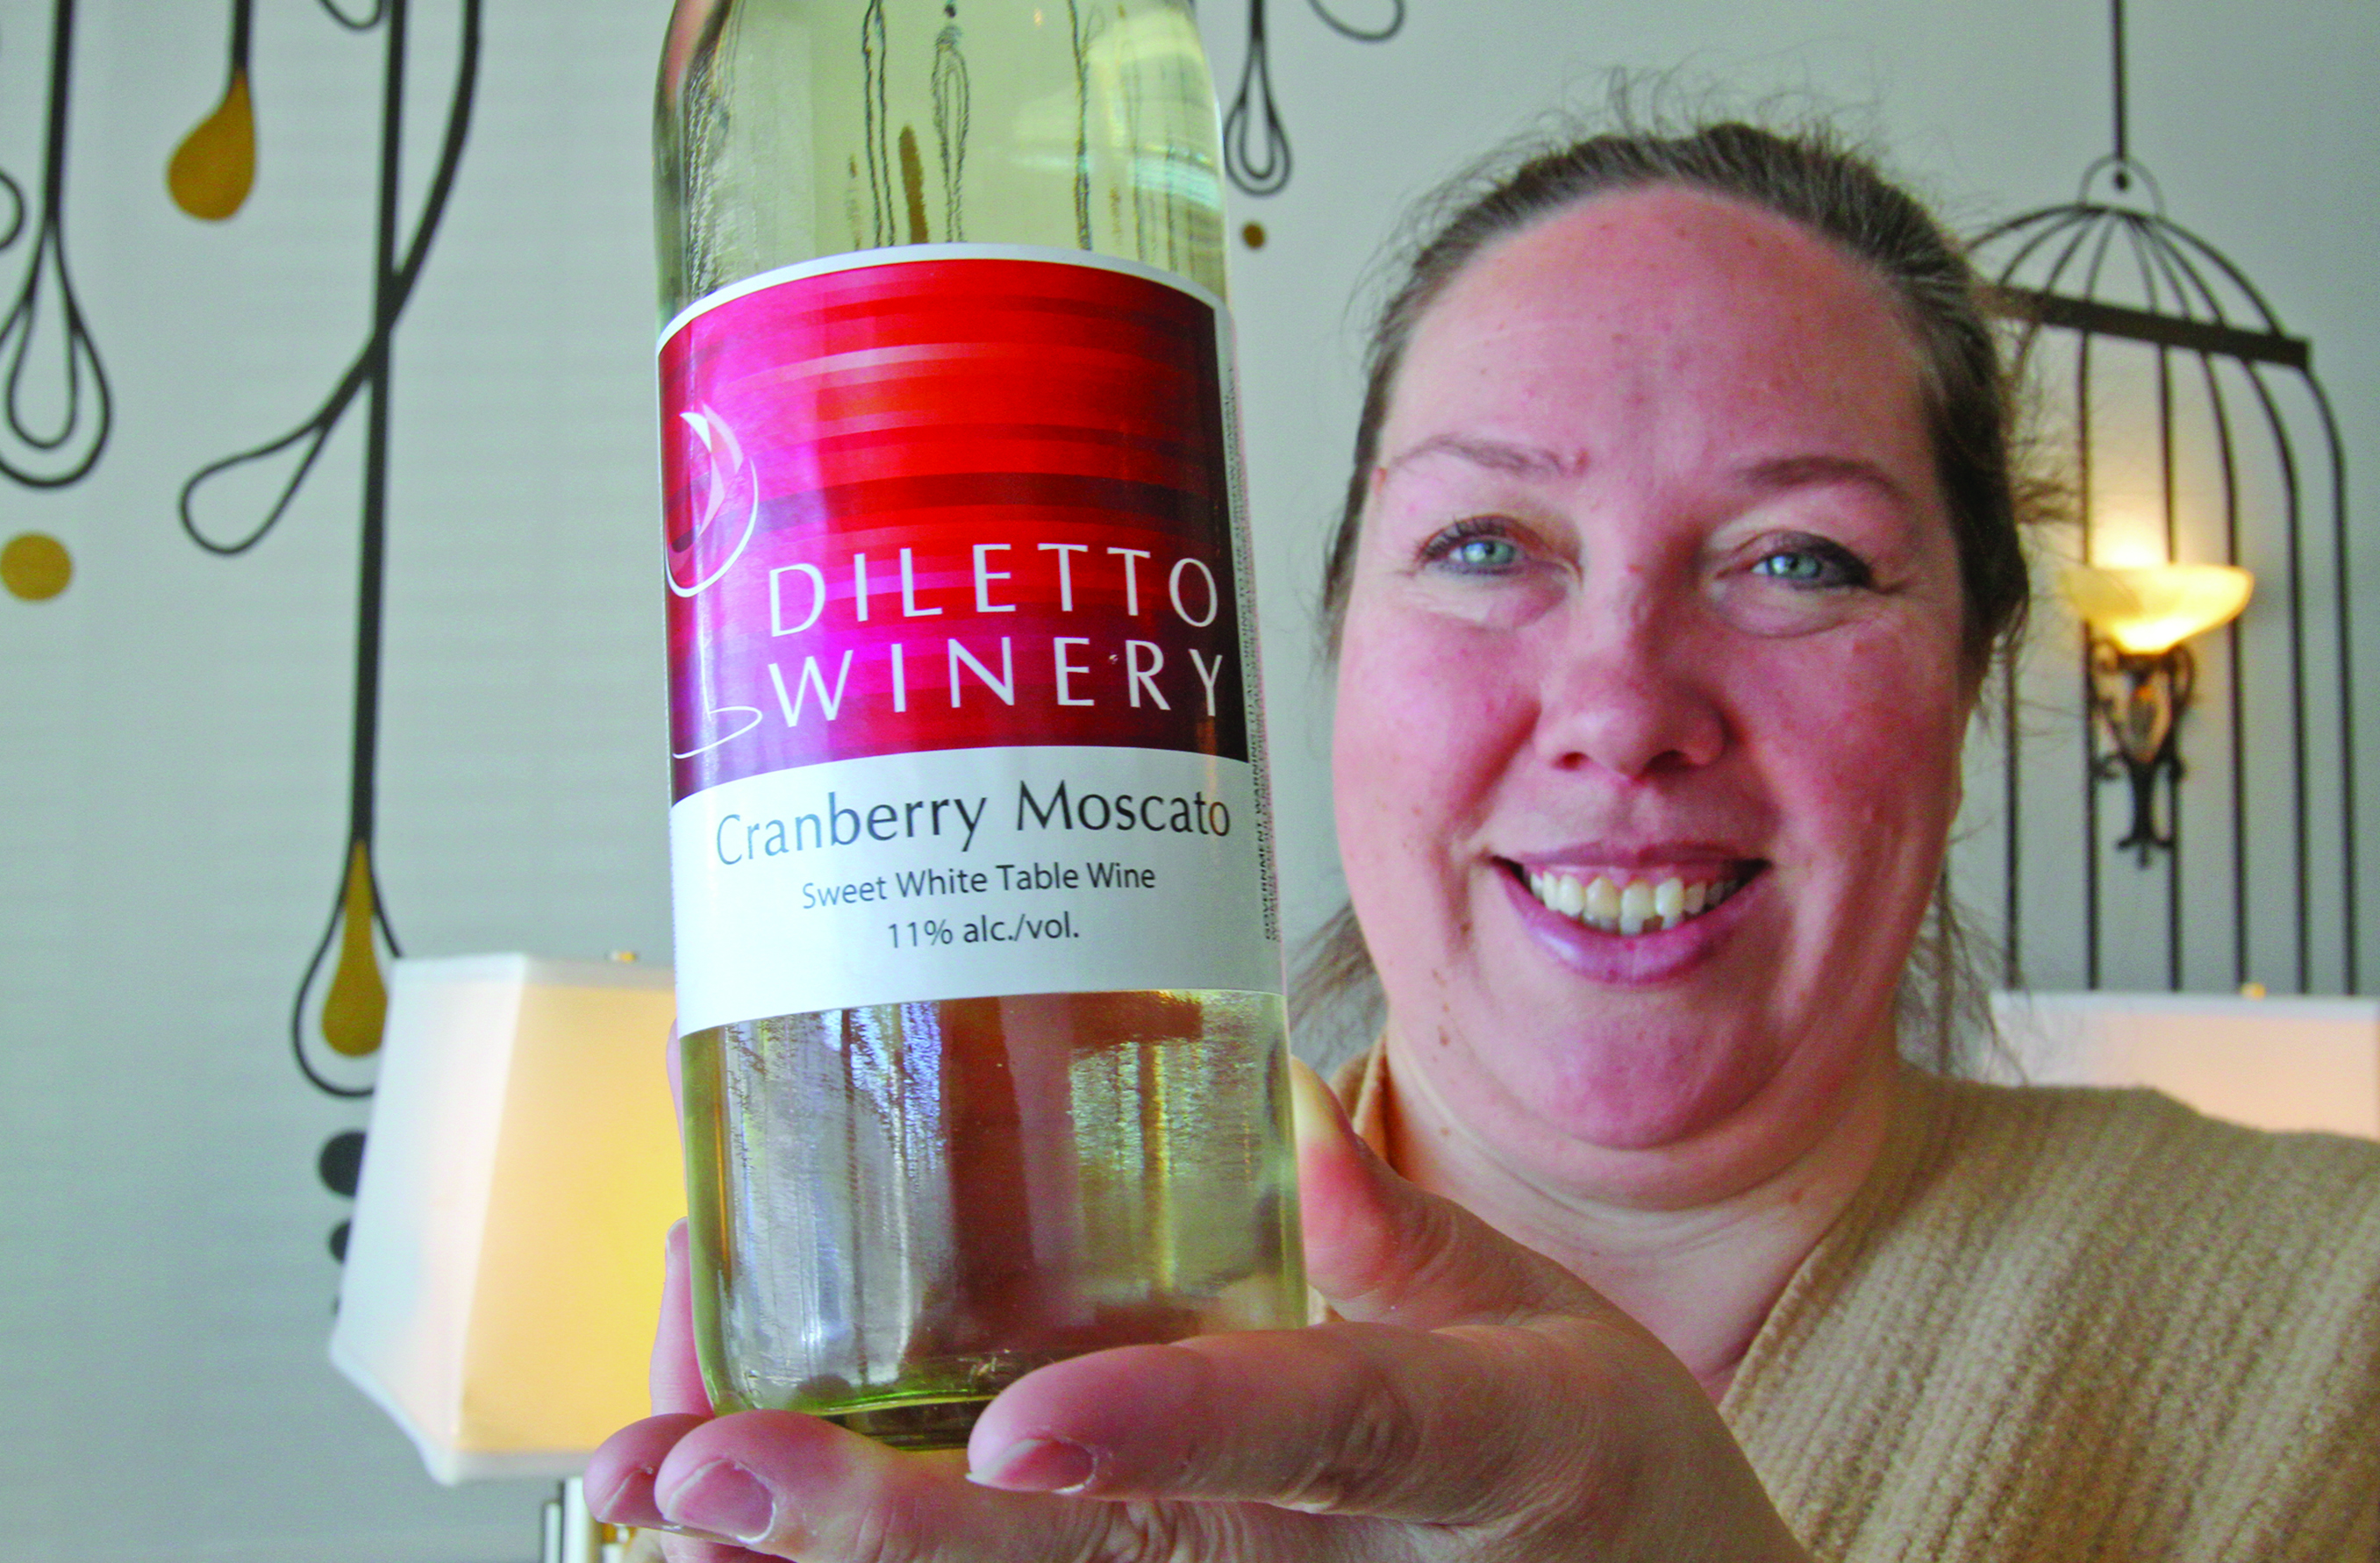 Diletto Winery in Boardman is open for events and is expected to open for regular hours in November, says owner Jacqueline Shell.